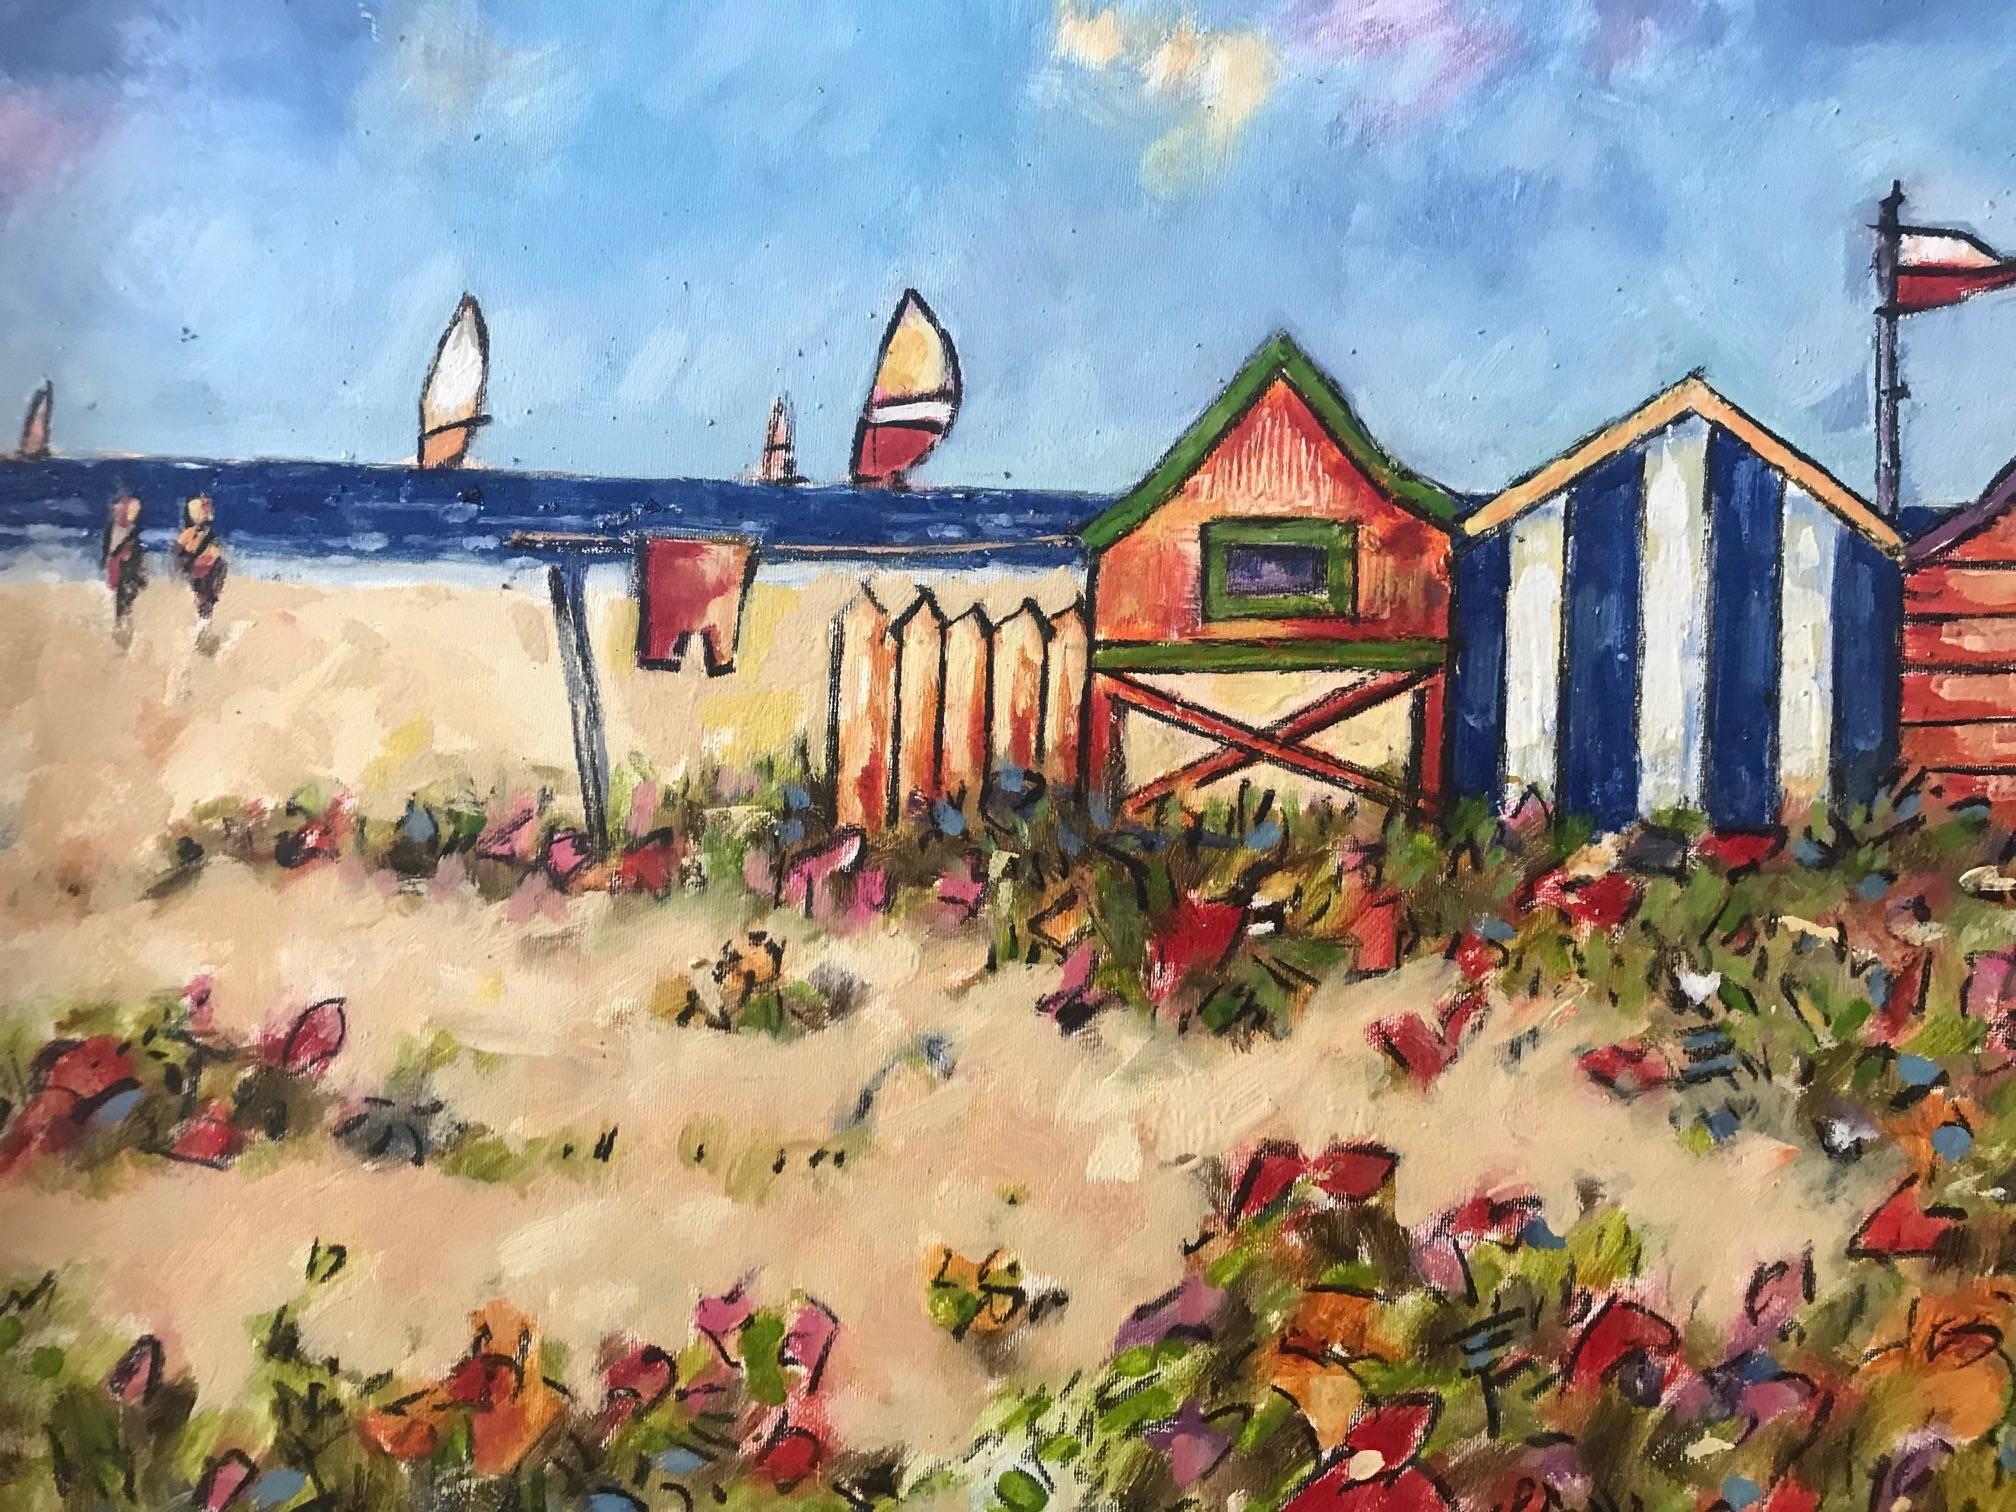 COME ON TO THE BEACH. BEACH HUTS, SEASCAPE - Brown Interior Painting by M. Del Burgo